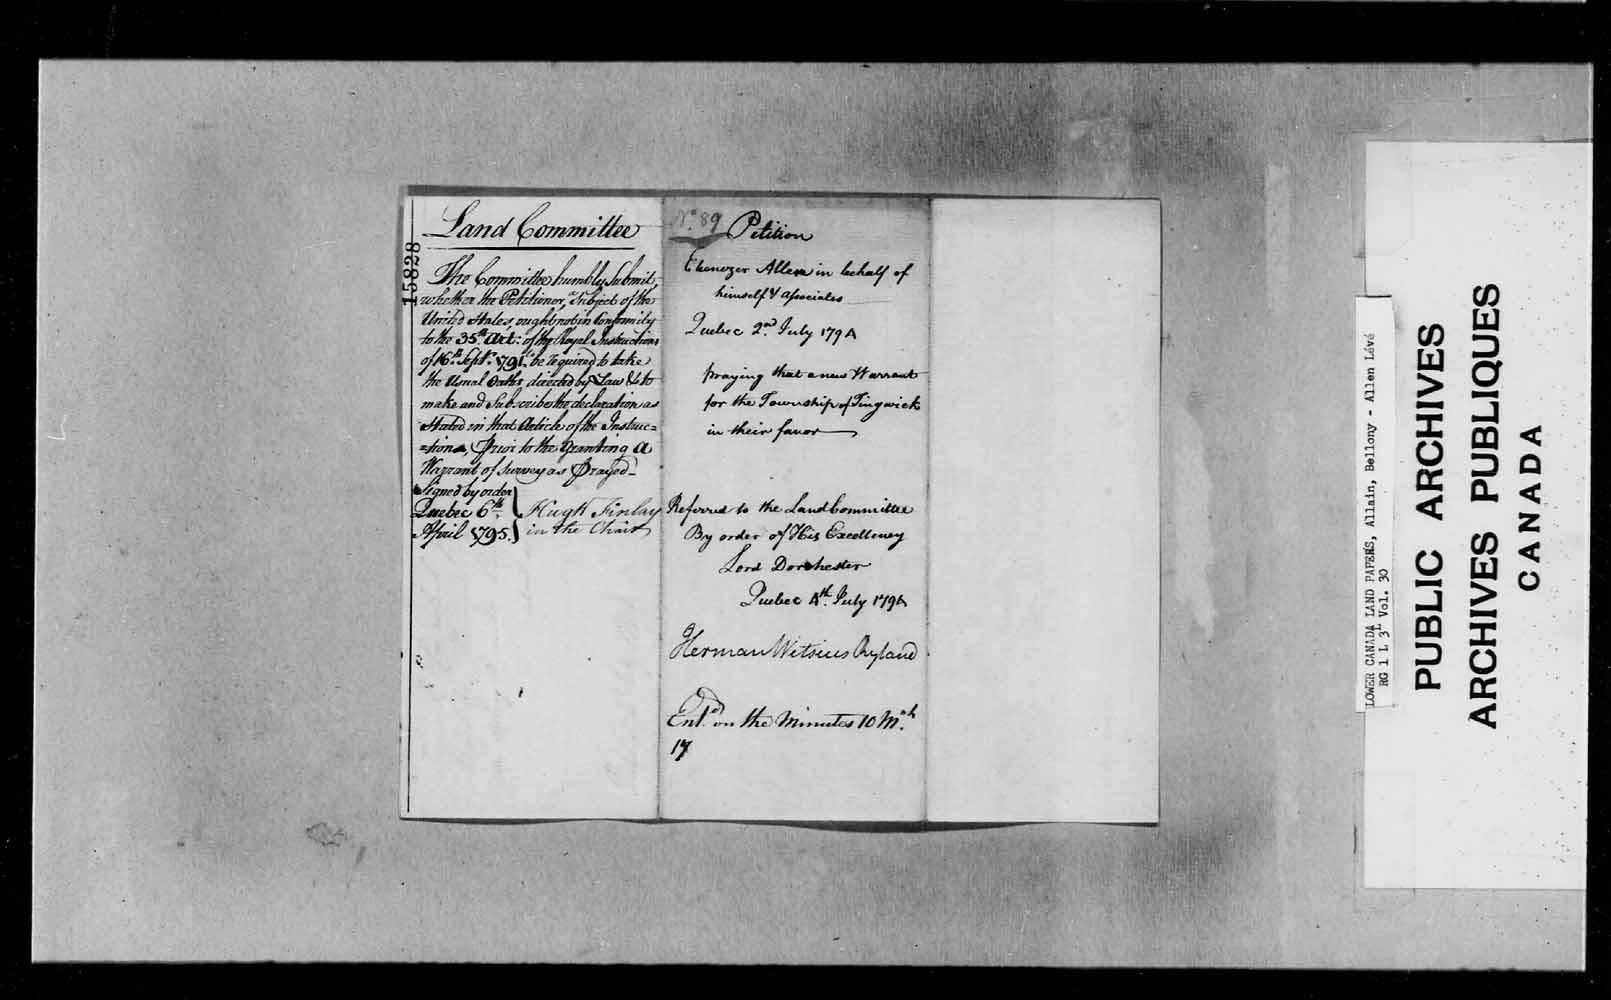 Digitized page of  for Image No.: e003702658